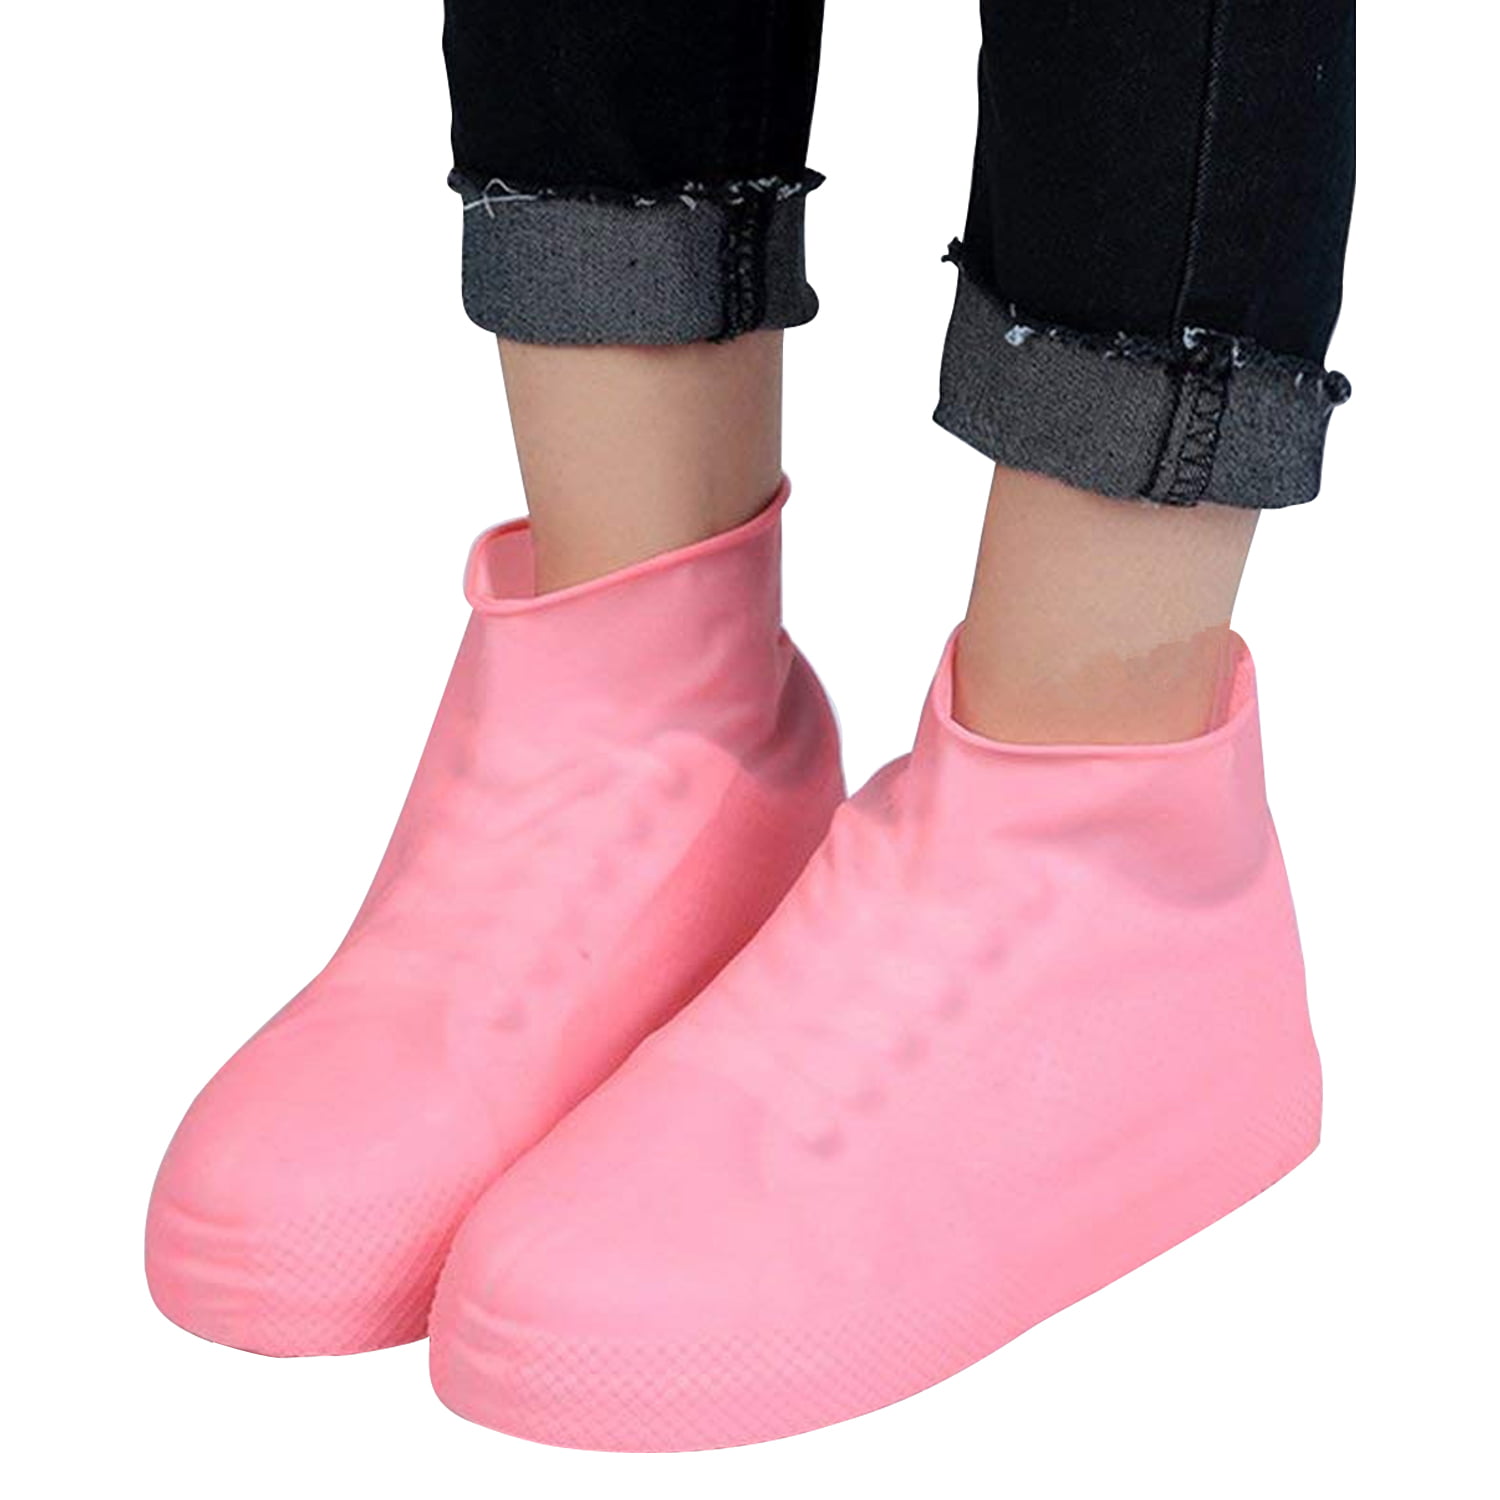 Details about   Unisex Waterproof Shoe Cover Latex Material Rain Indoor Outdoor Shoes Protectors 